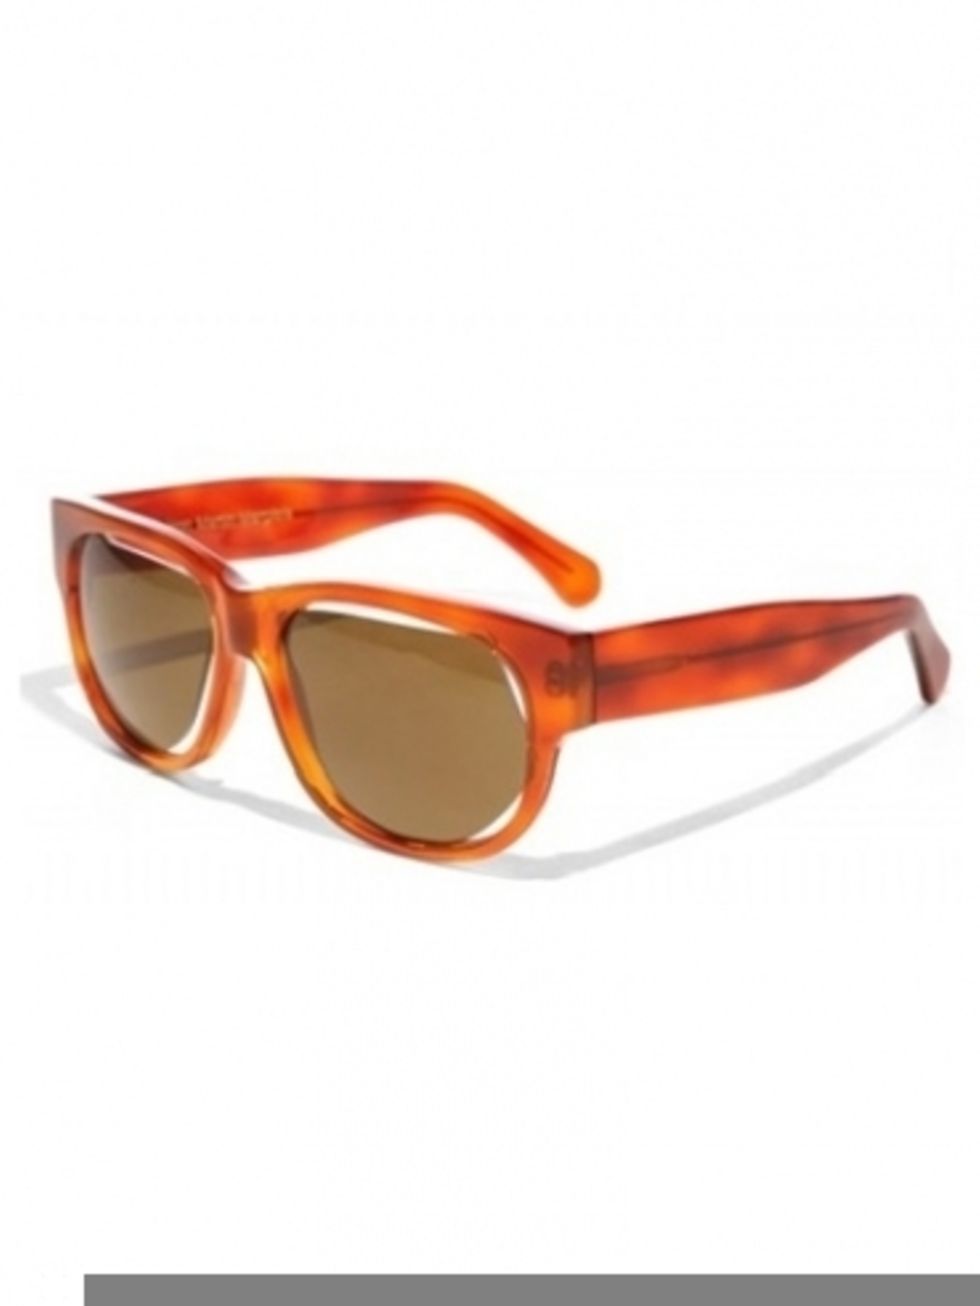 Eyewear, Glasses, Vision care, Product, Brown, Orange, Glass, Personal protective equipment, Red, Photograph, 